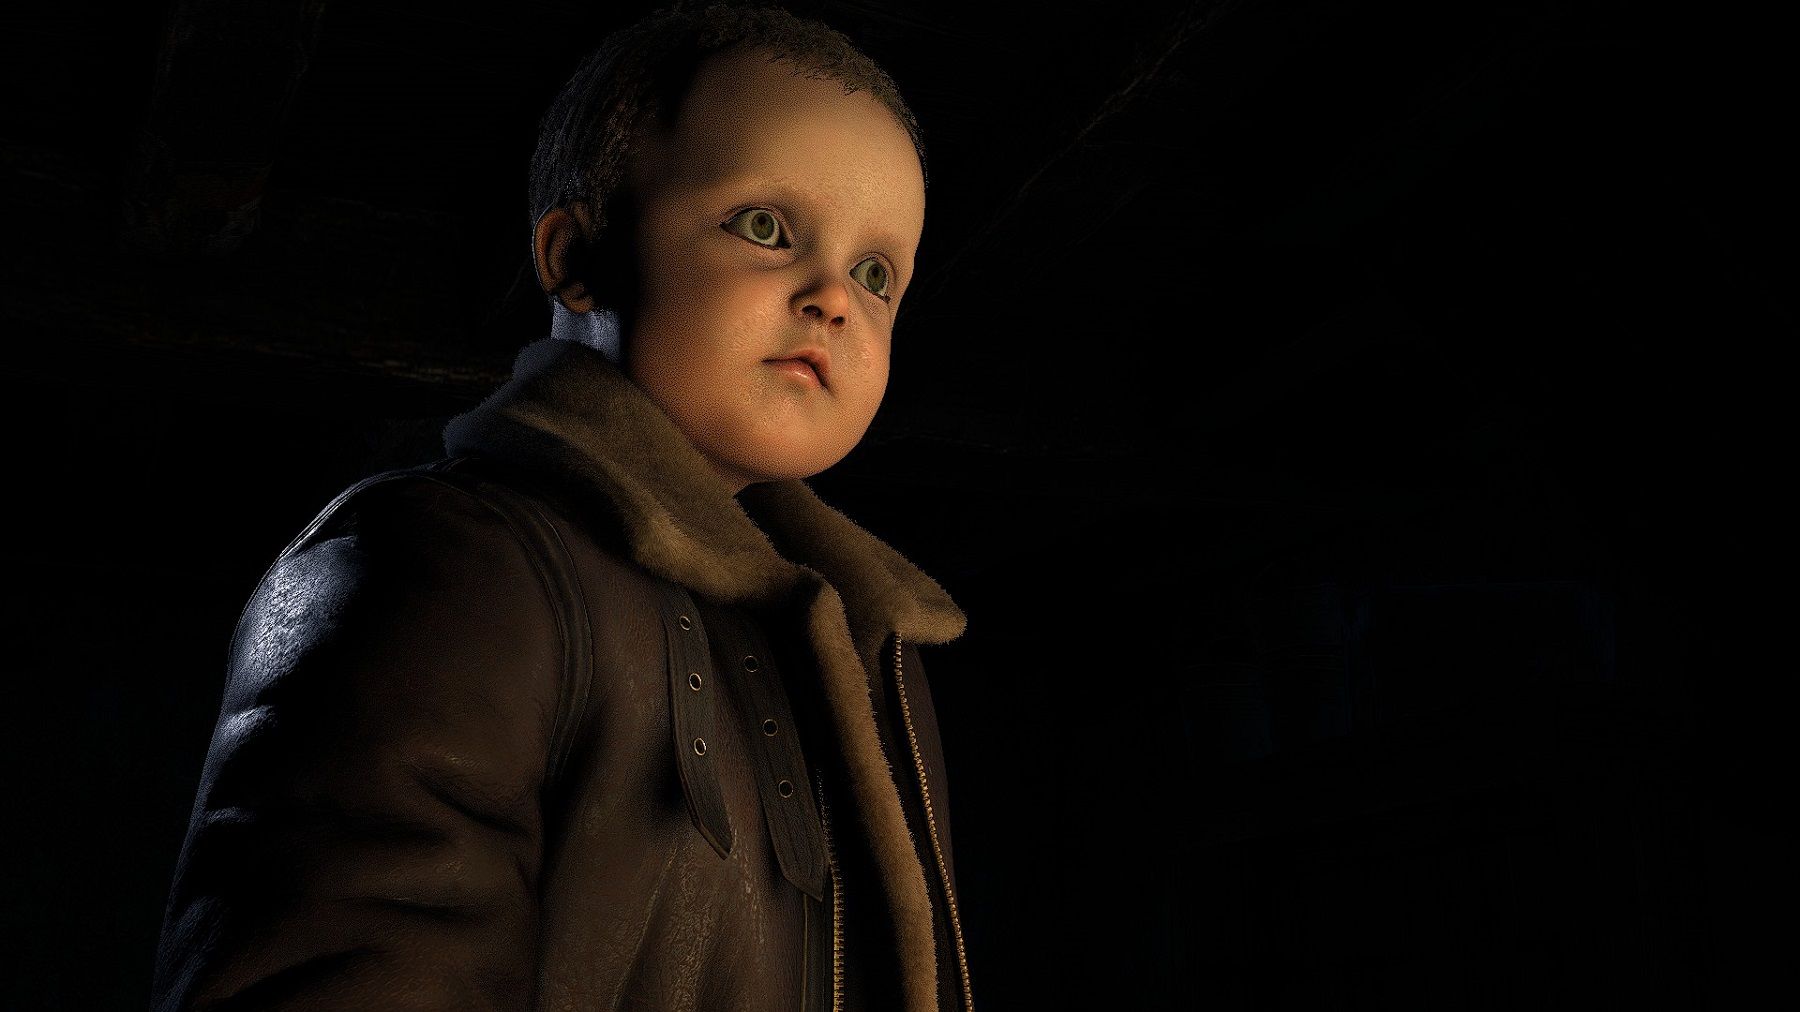 Image from the remake of Resident Evil 4 showing Leon Kennedy as a giant baby.